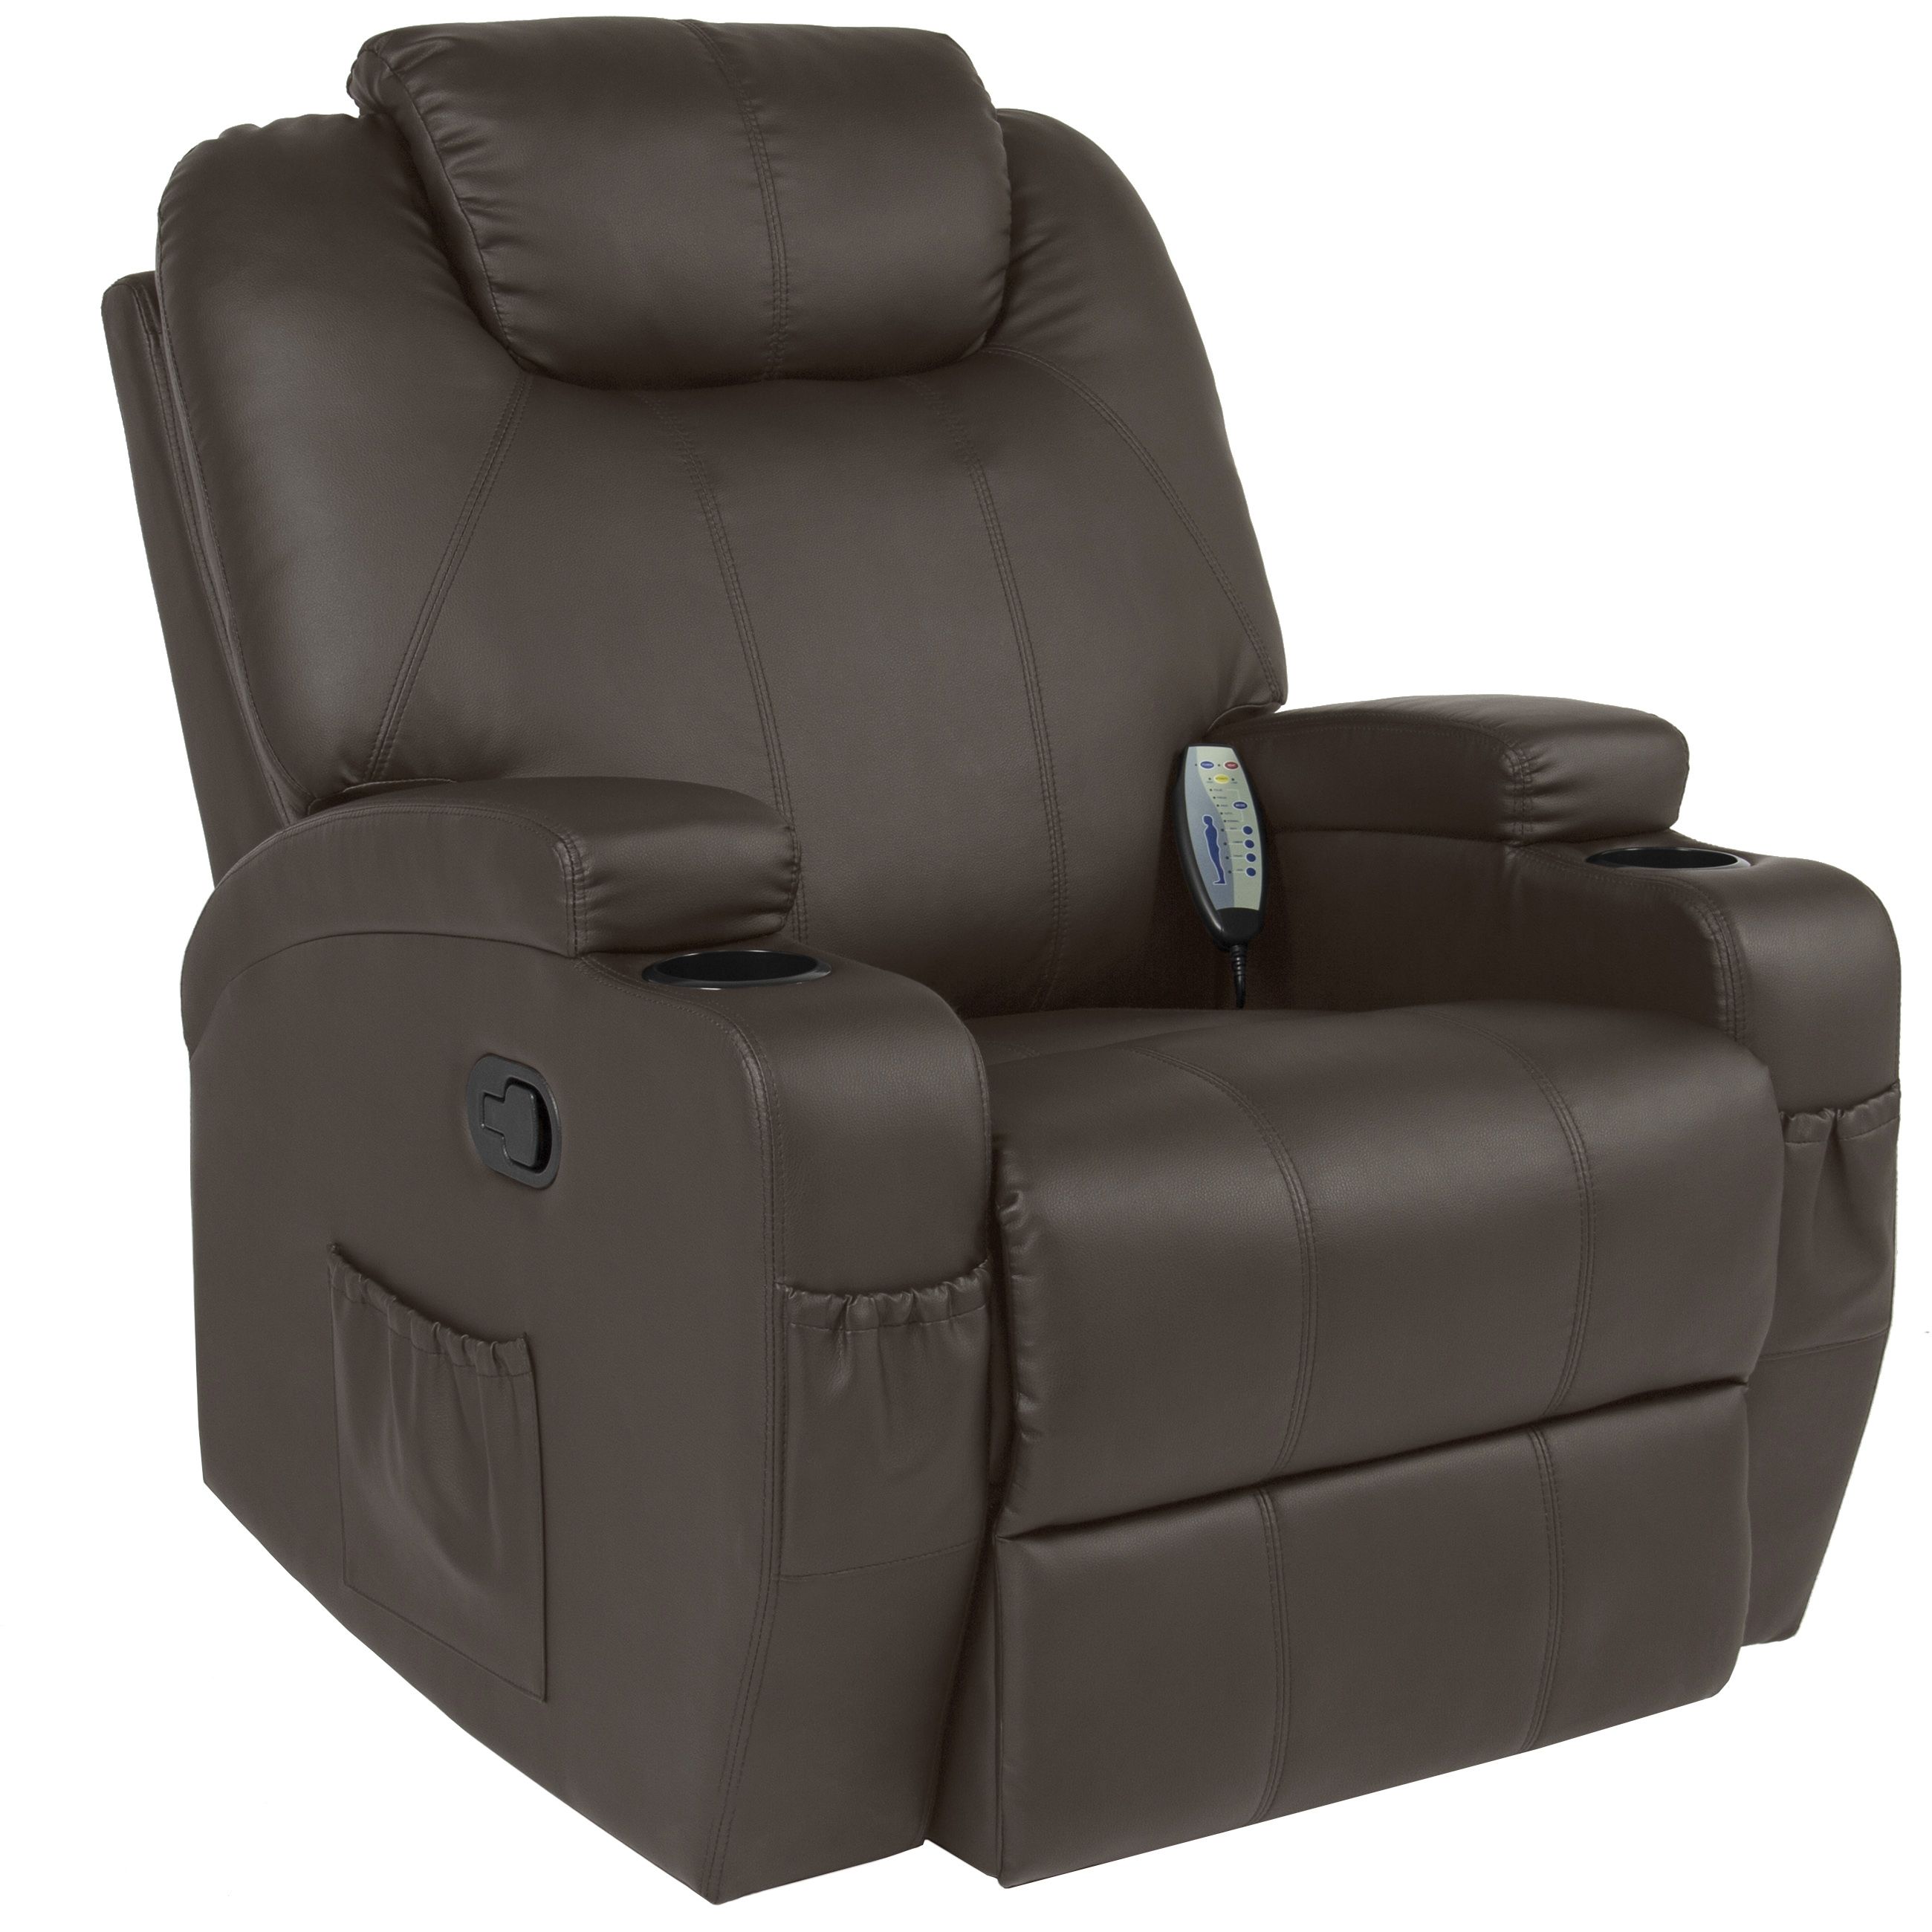 Massage Chairs Ebay For Ergonomic Sofas And Chairs (Photo 16375 of 35622)